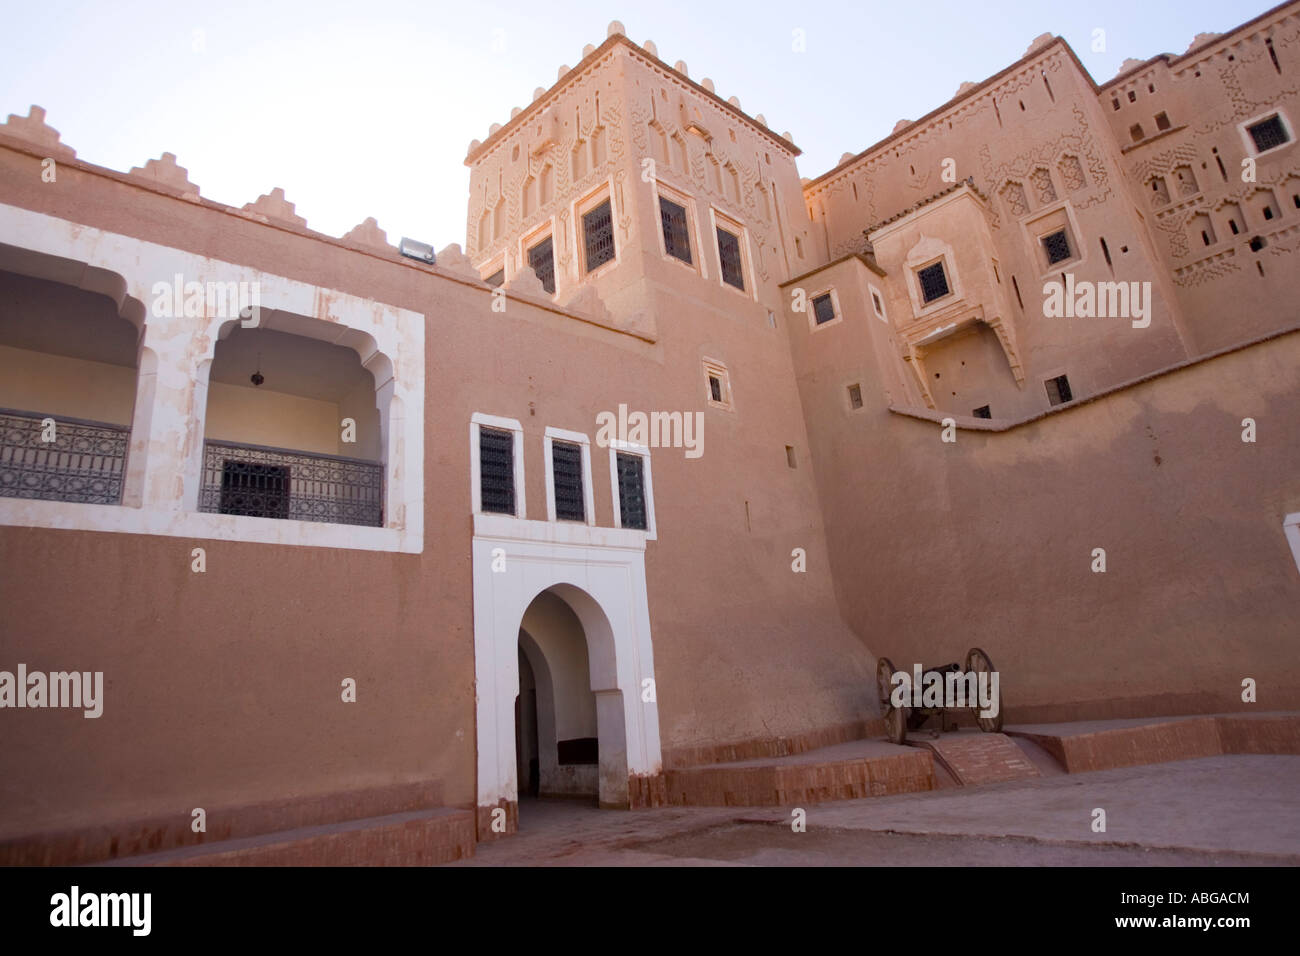 Cannon at entrance to Kasbah de Taourirt in Ouarzazate Morocco Stock Photo